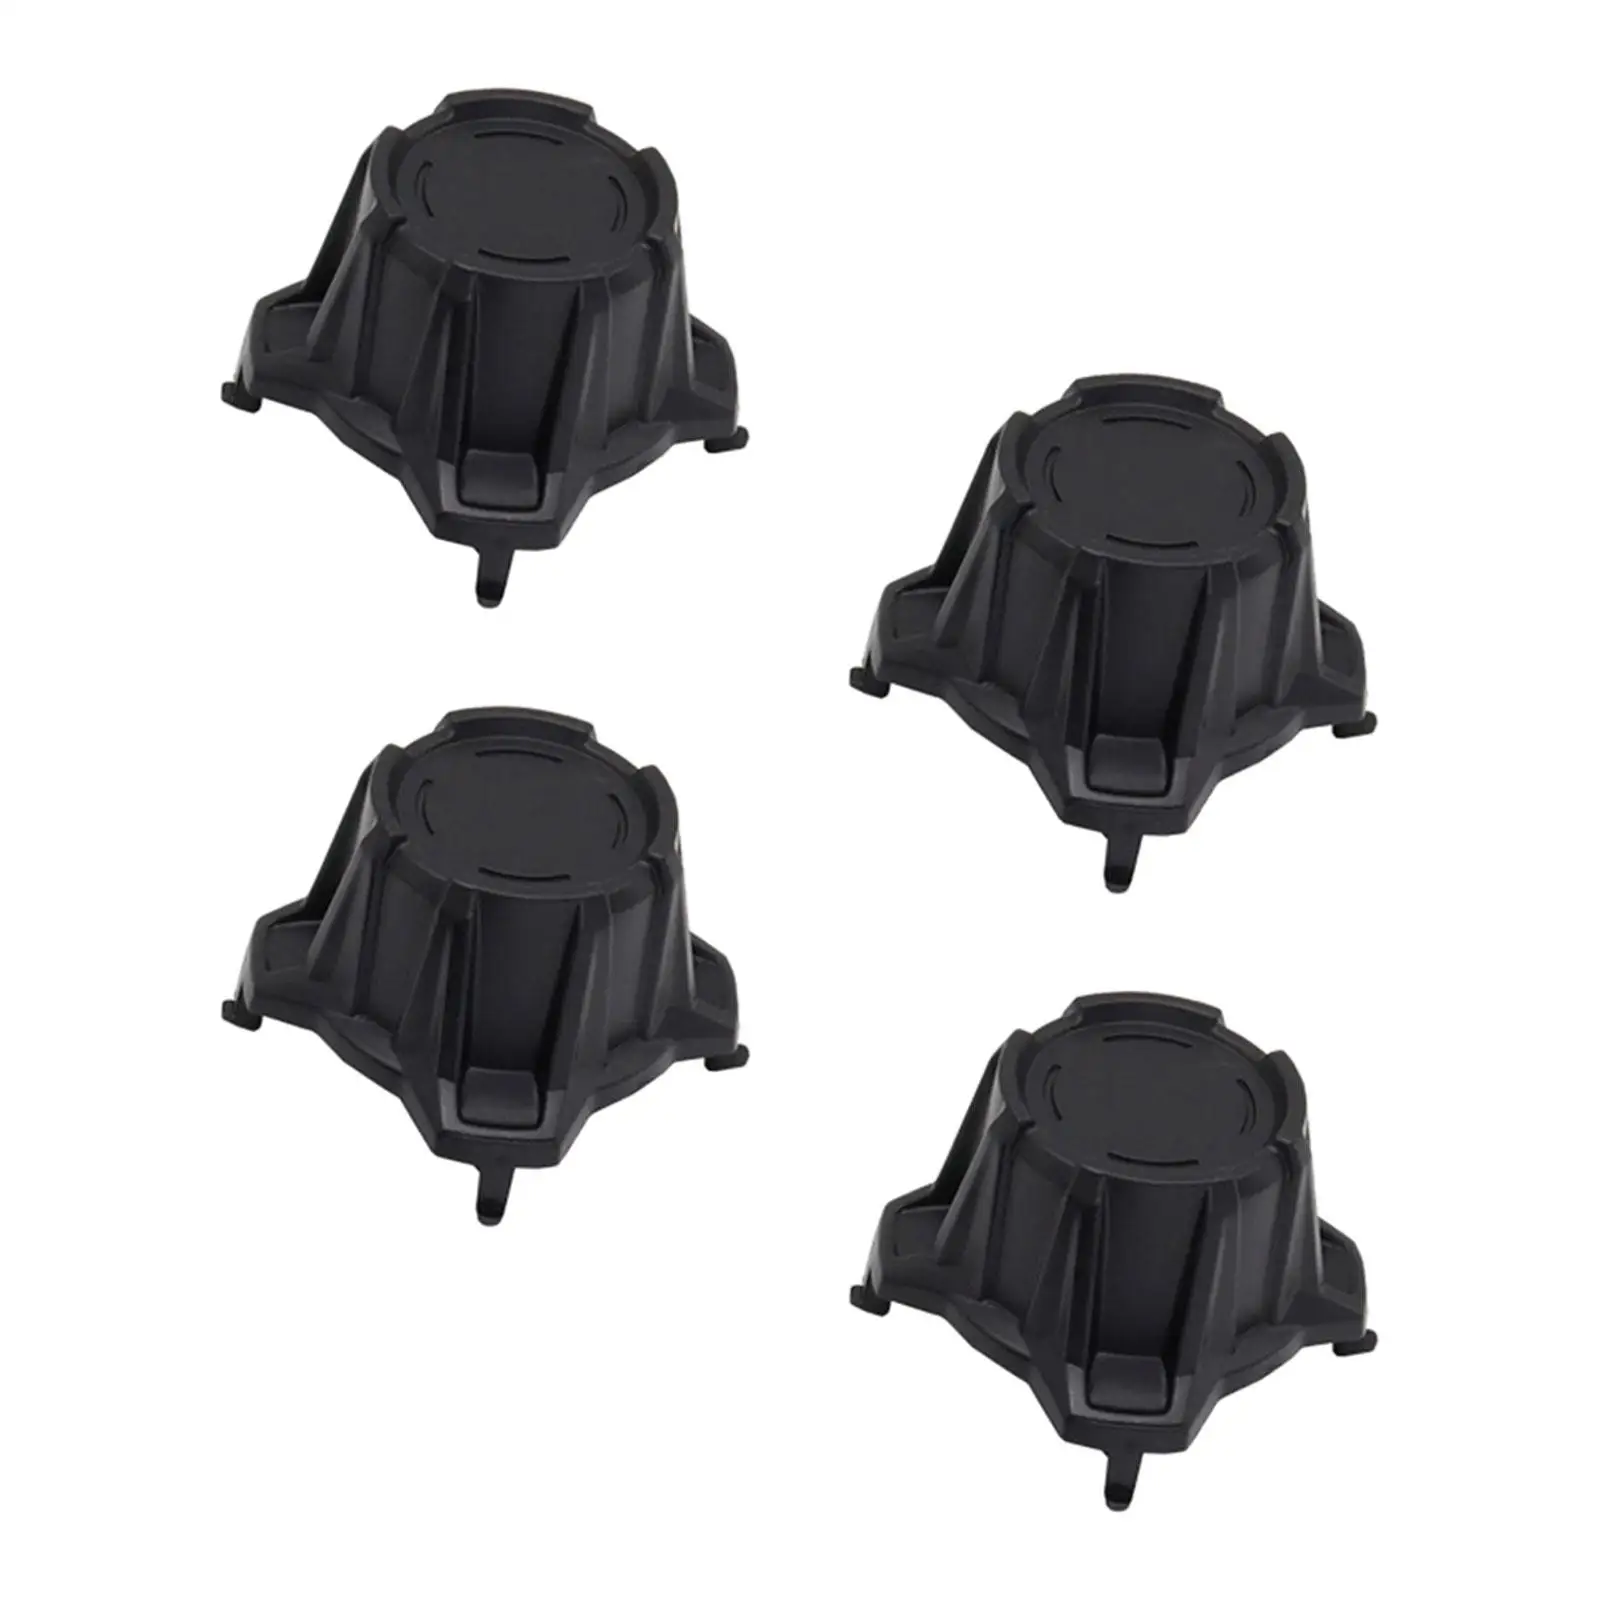 4Pcs Wheel Center Hub Caps Motorbike Spare Parts Cap Cover Assembly PP for x3 2017-2020 Stable Performance Easily Install